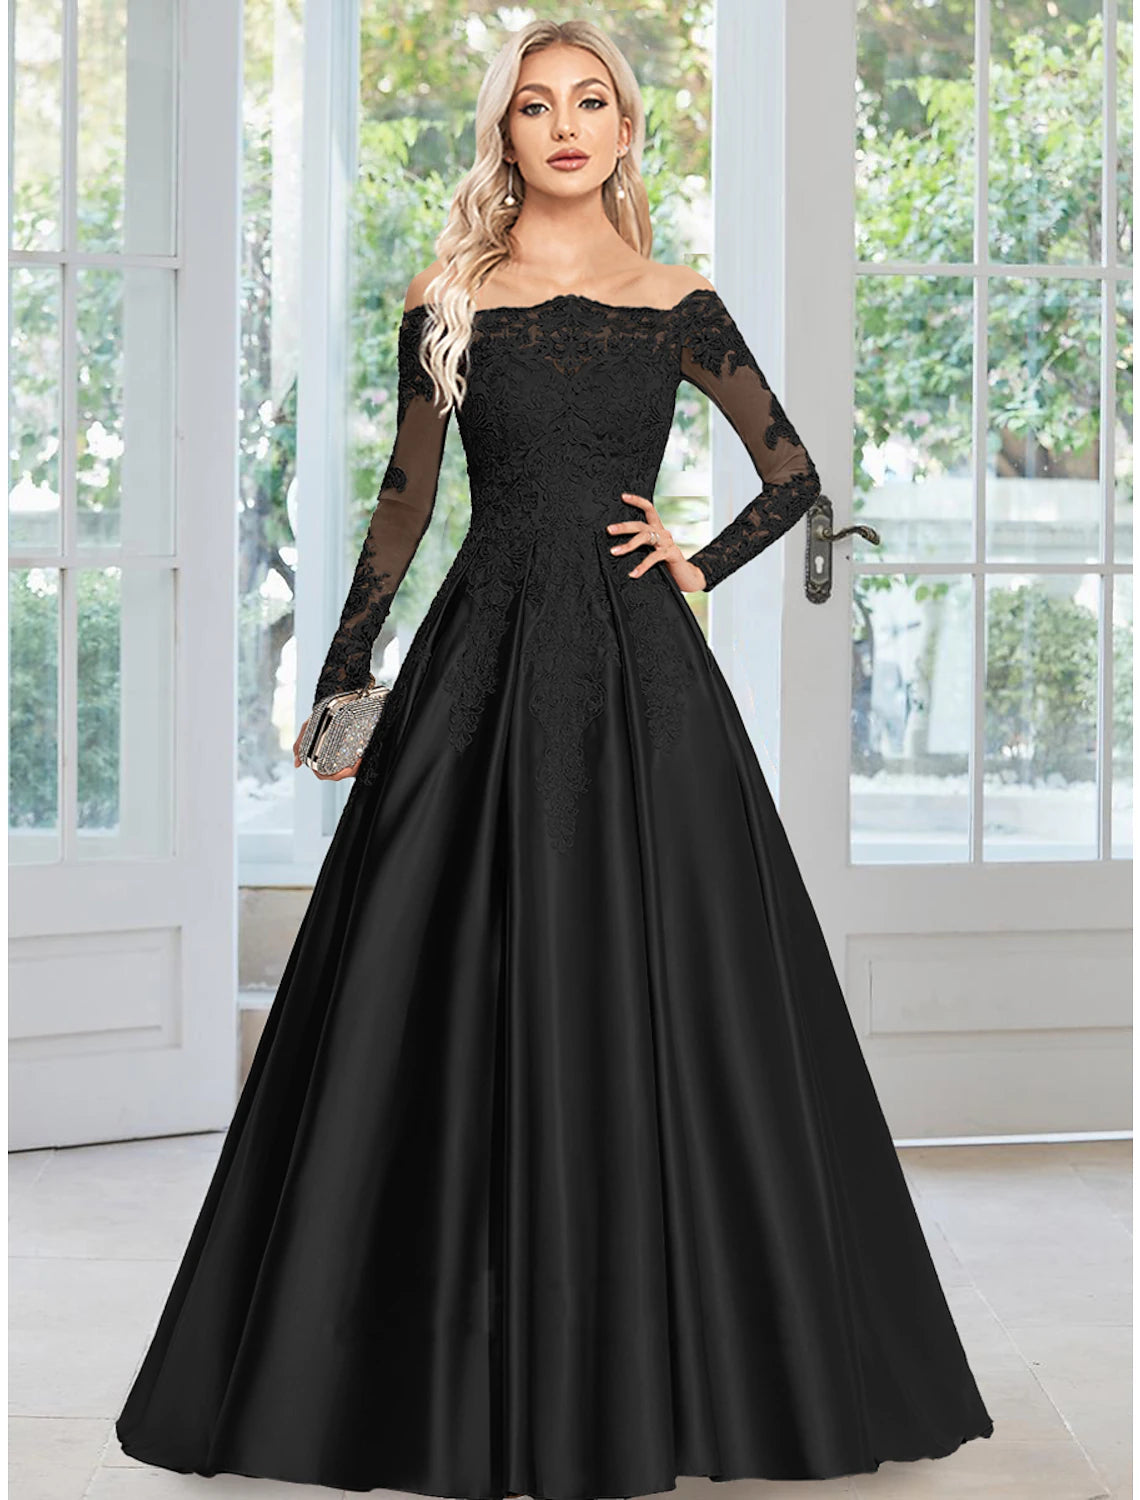 A-Line Evening Gown Elegant Dress Formal Wedding Guest Court Train Long Sleeve Off Shoulder Satin with Appliques